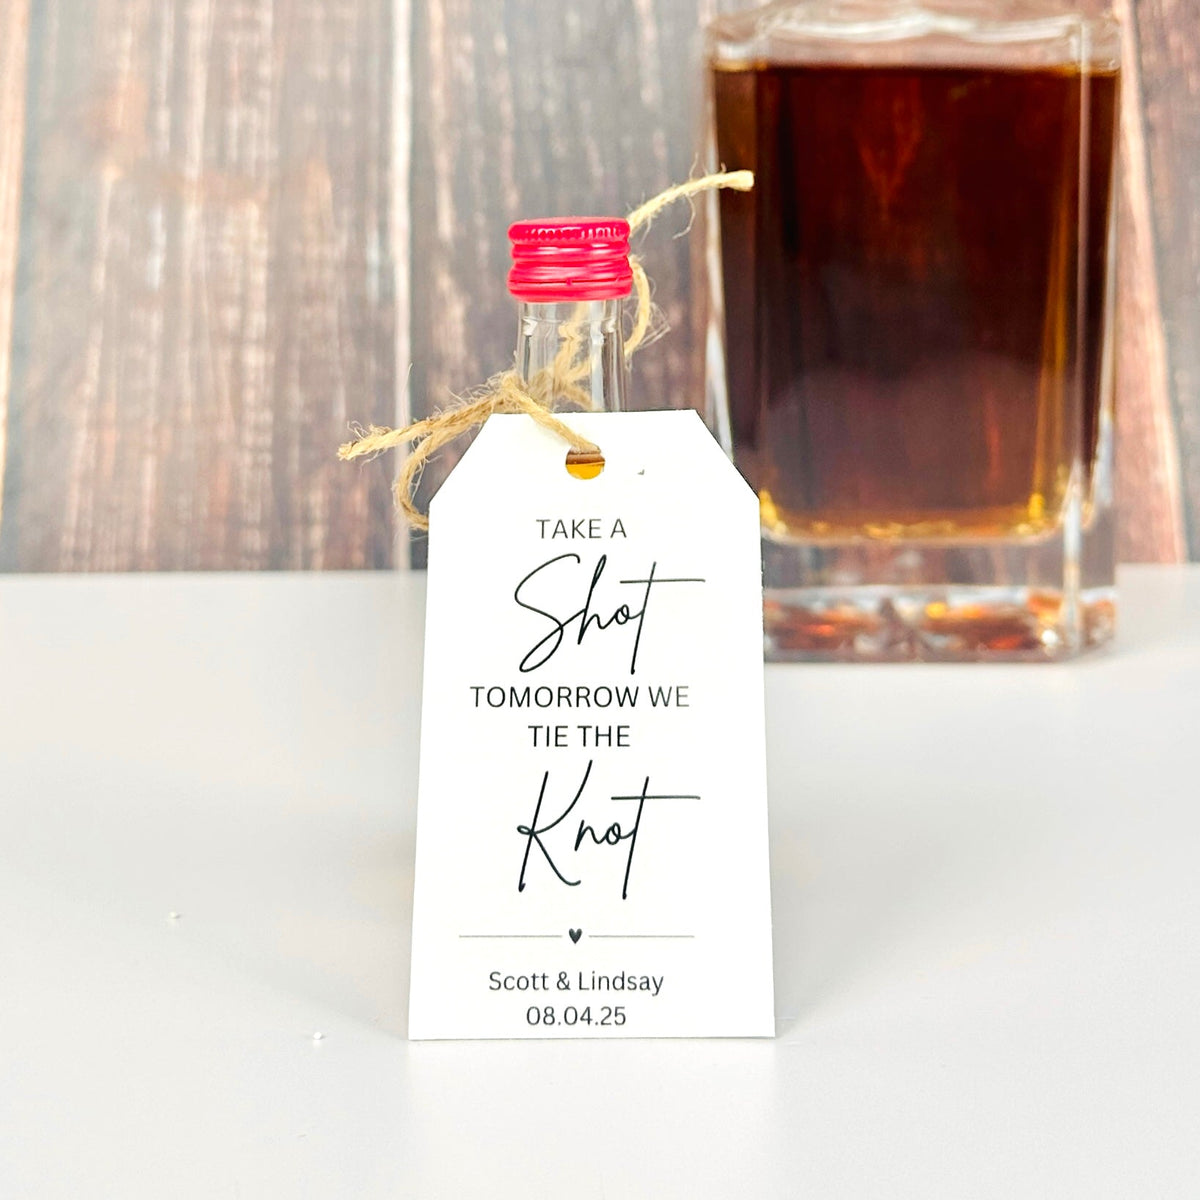 Take A Shot, We're Tying The Knot - Forever Wedding Favors